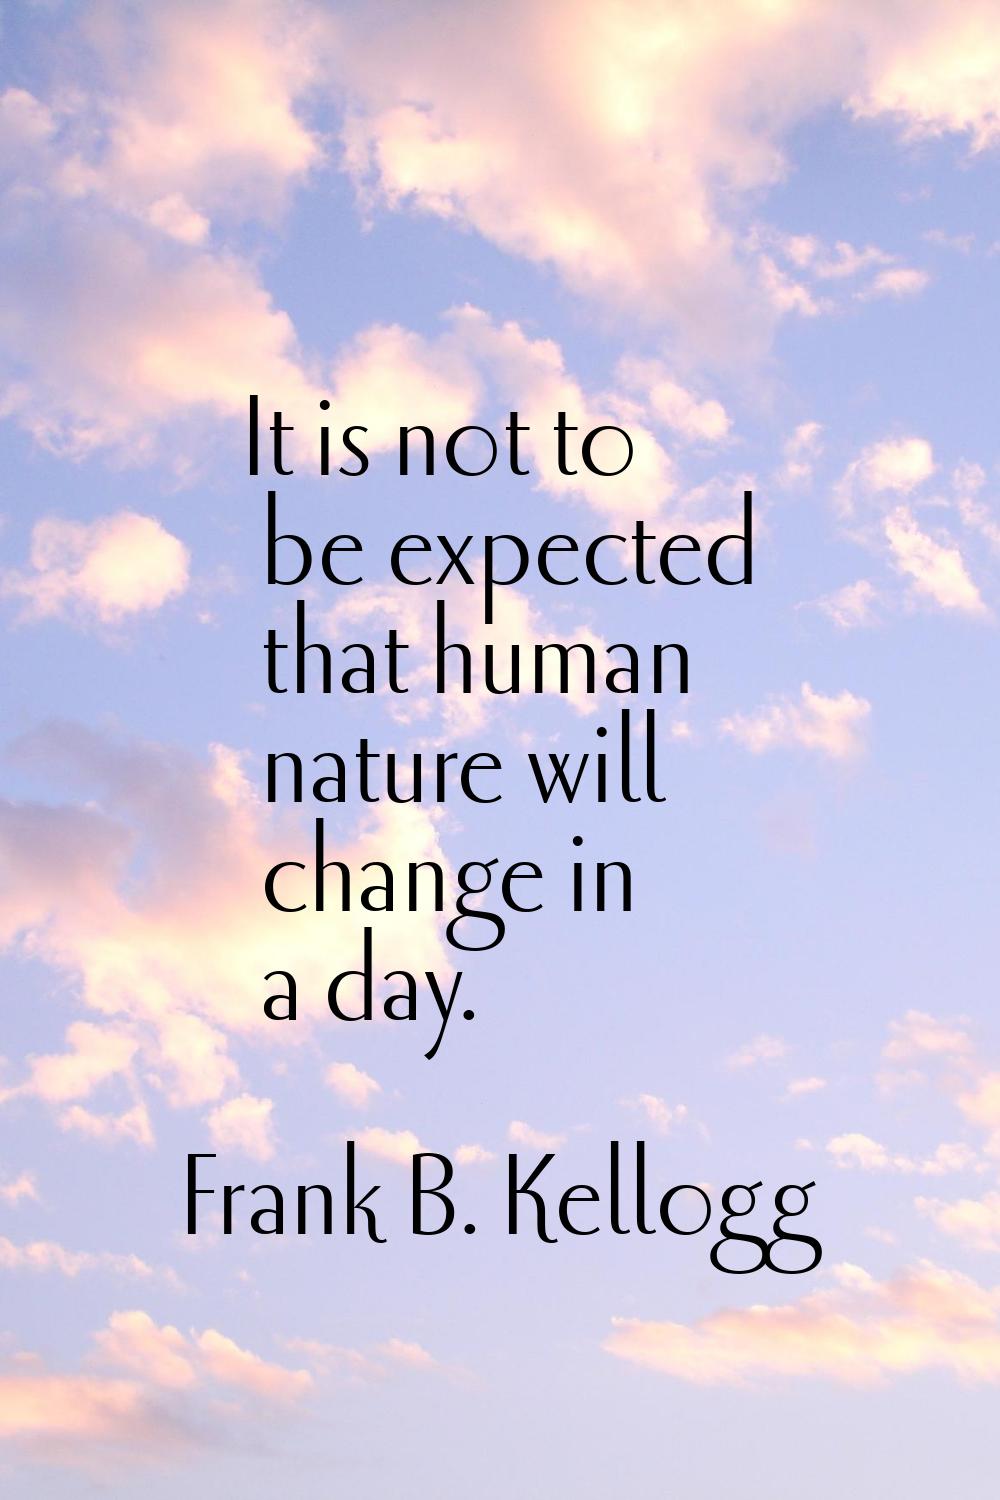 It is not to be expected that human nature will change in a day.